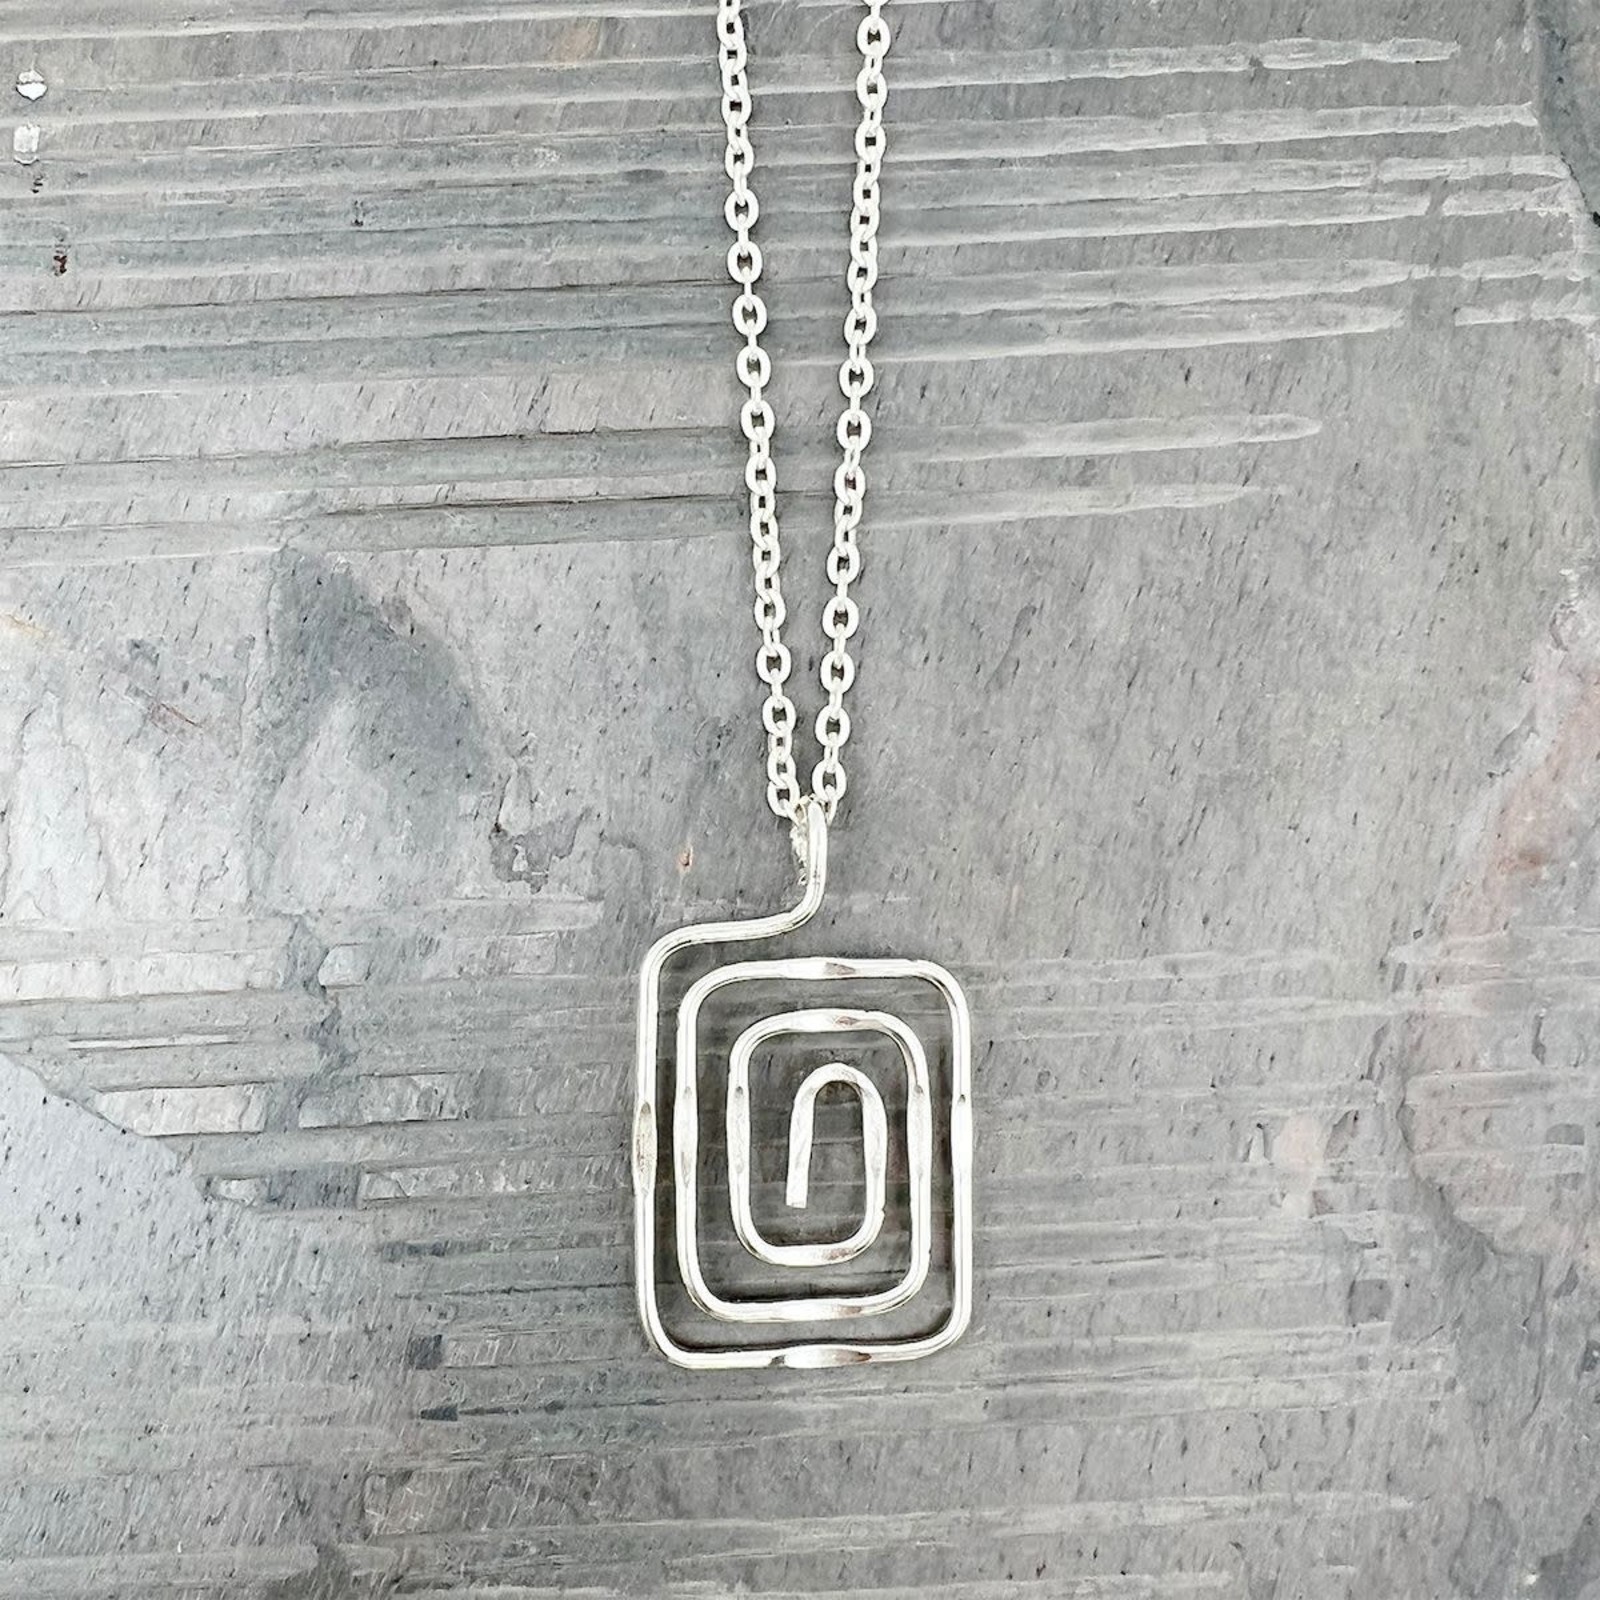 Anju SILVER PLATED NECKLACE - SMALLER SIZE SQUARE SPIRAL  NS119 loading=